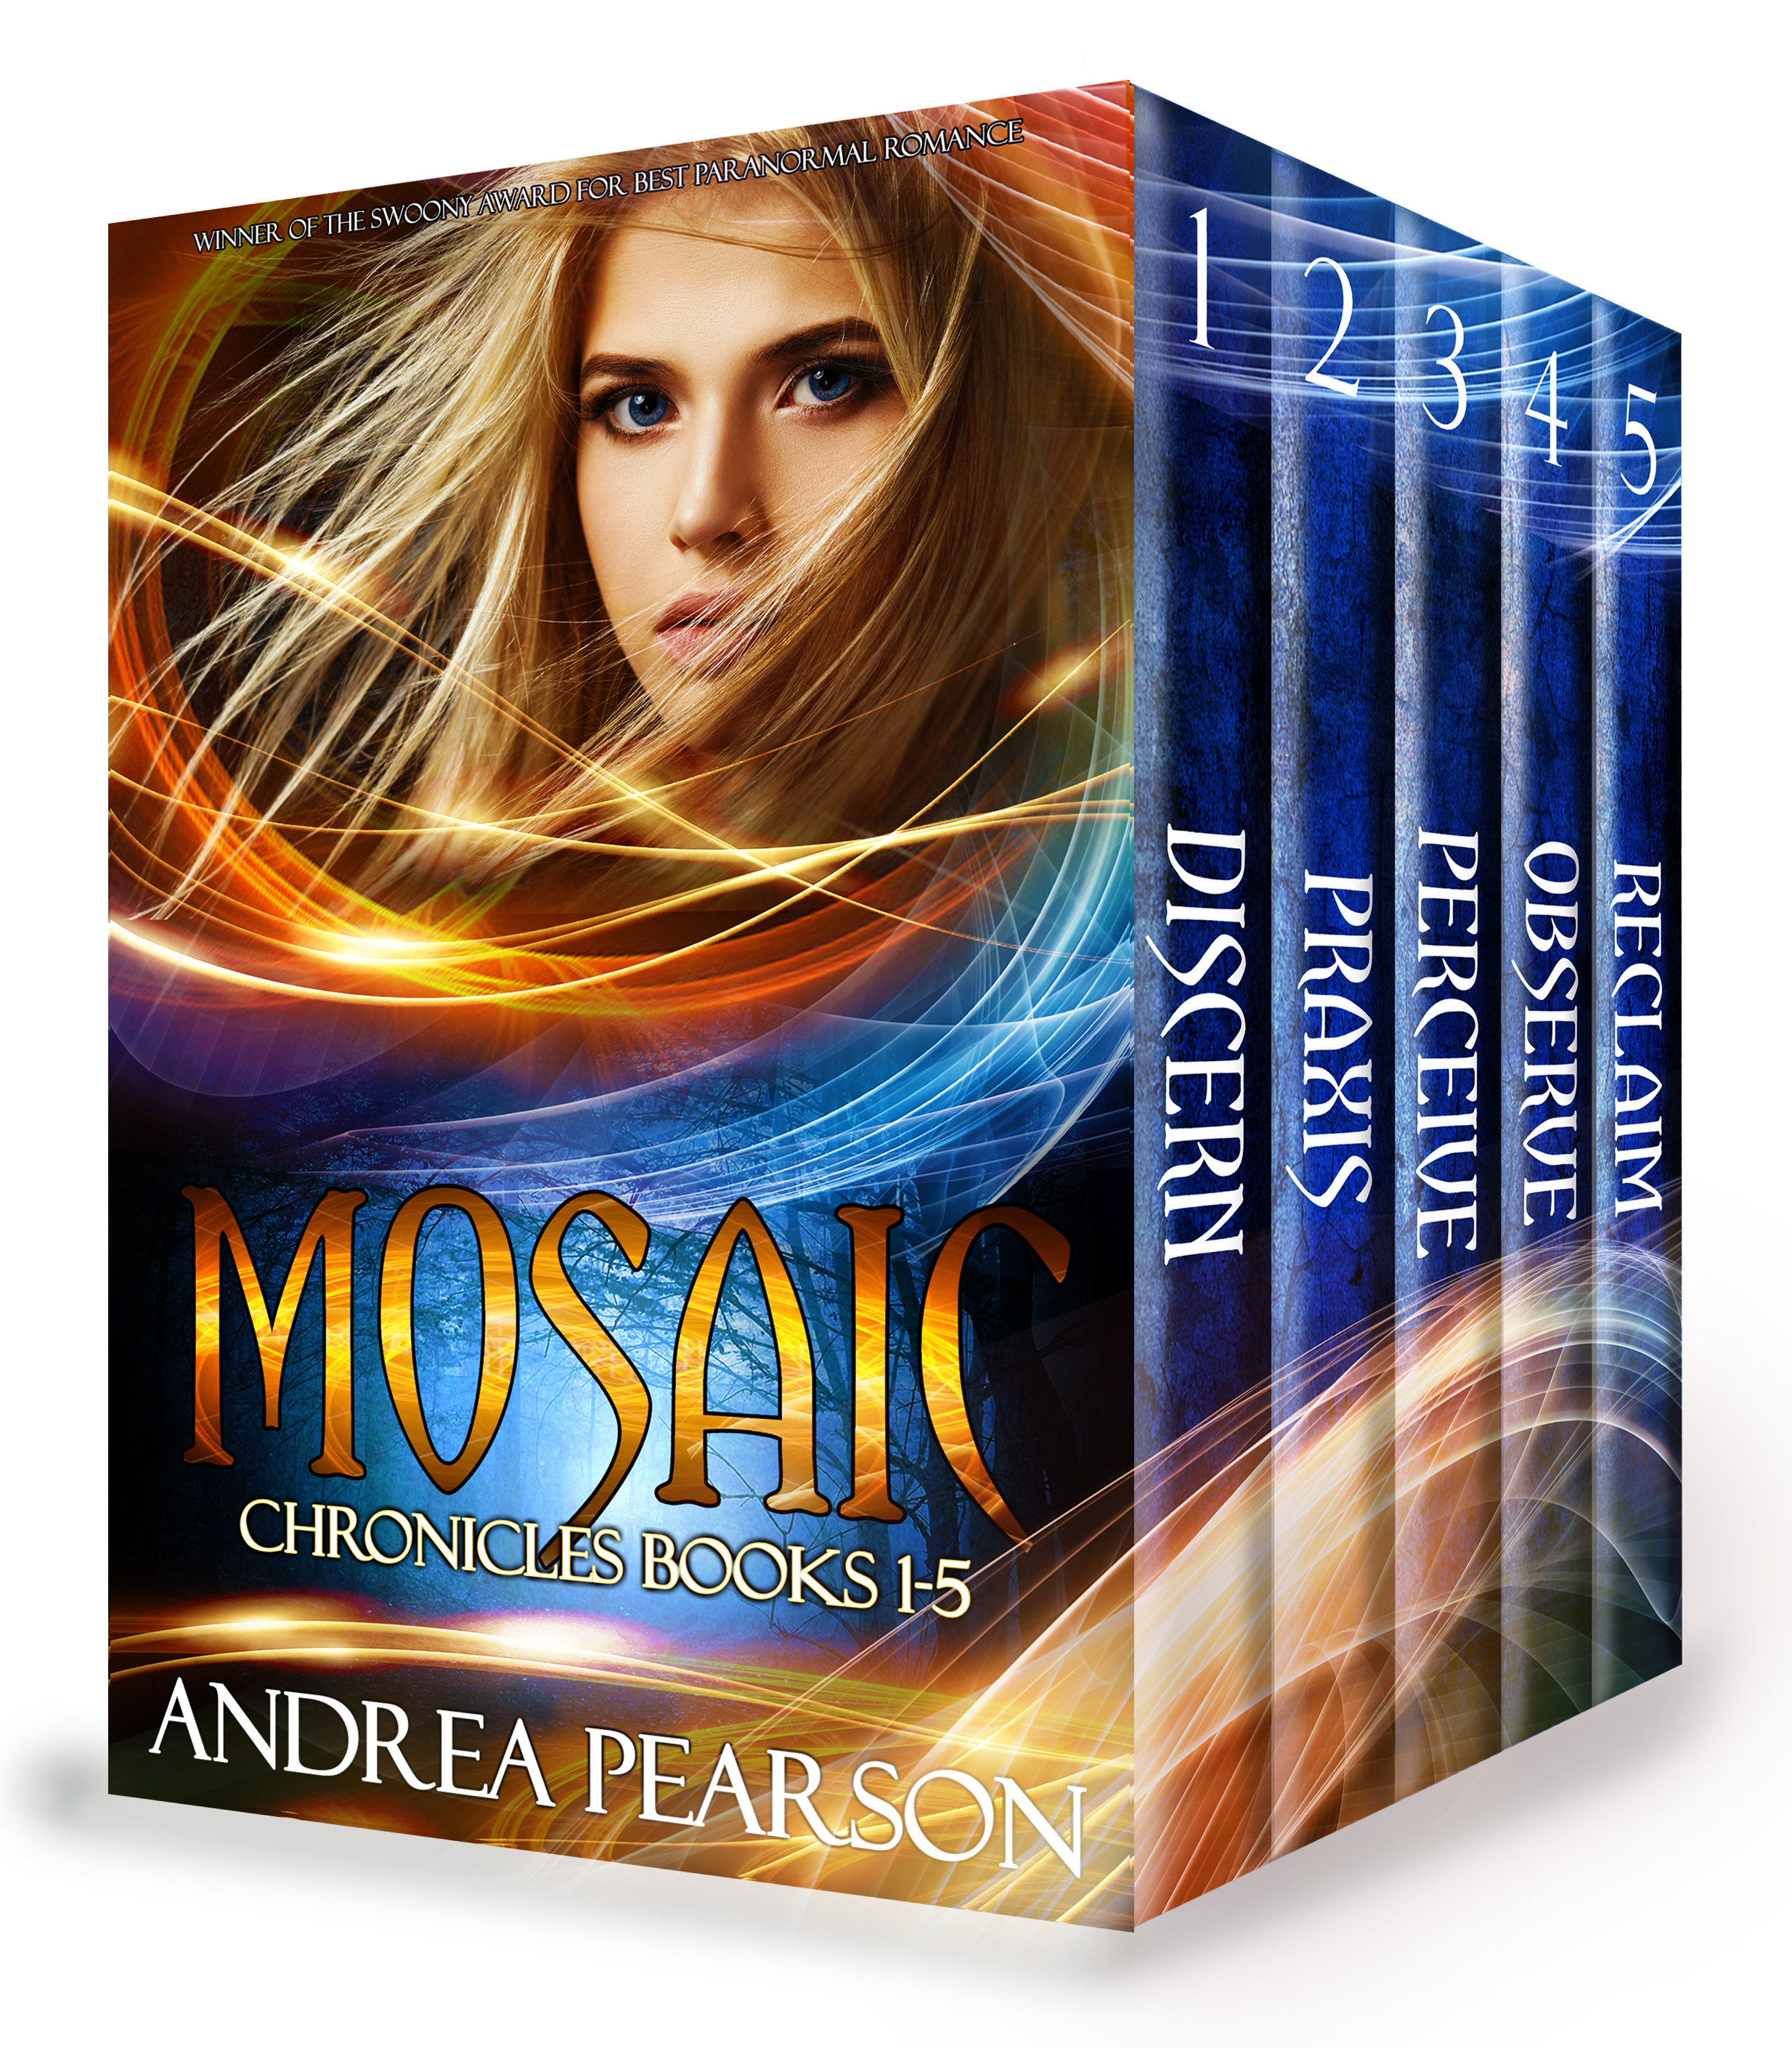 FREE: Mosaic Chronicles Boxed Set by Andrea Pearson